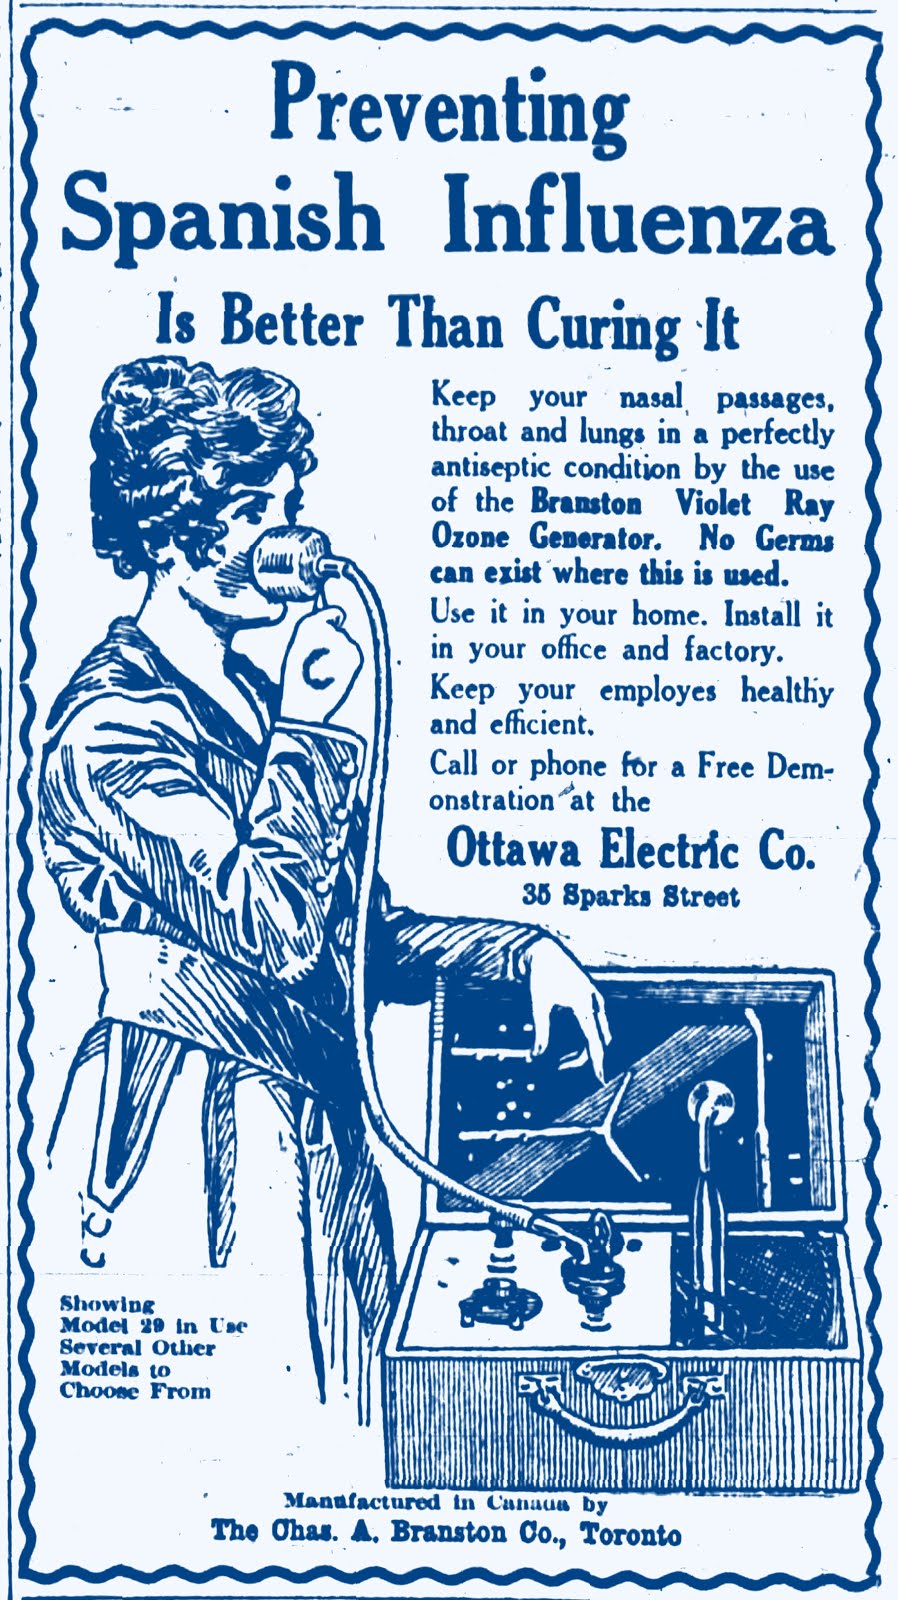 clipping advertising Violet Ray technology as preventive against spanish flu, 1918